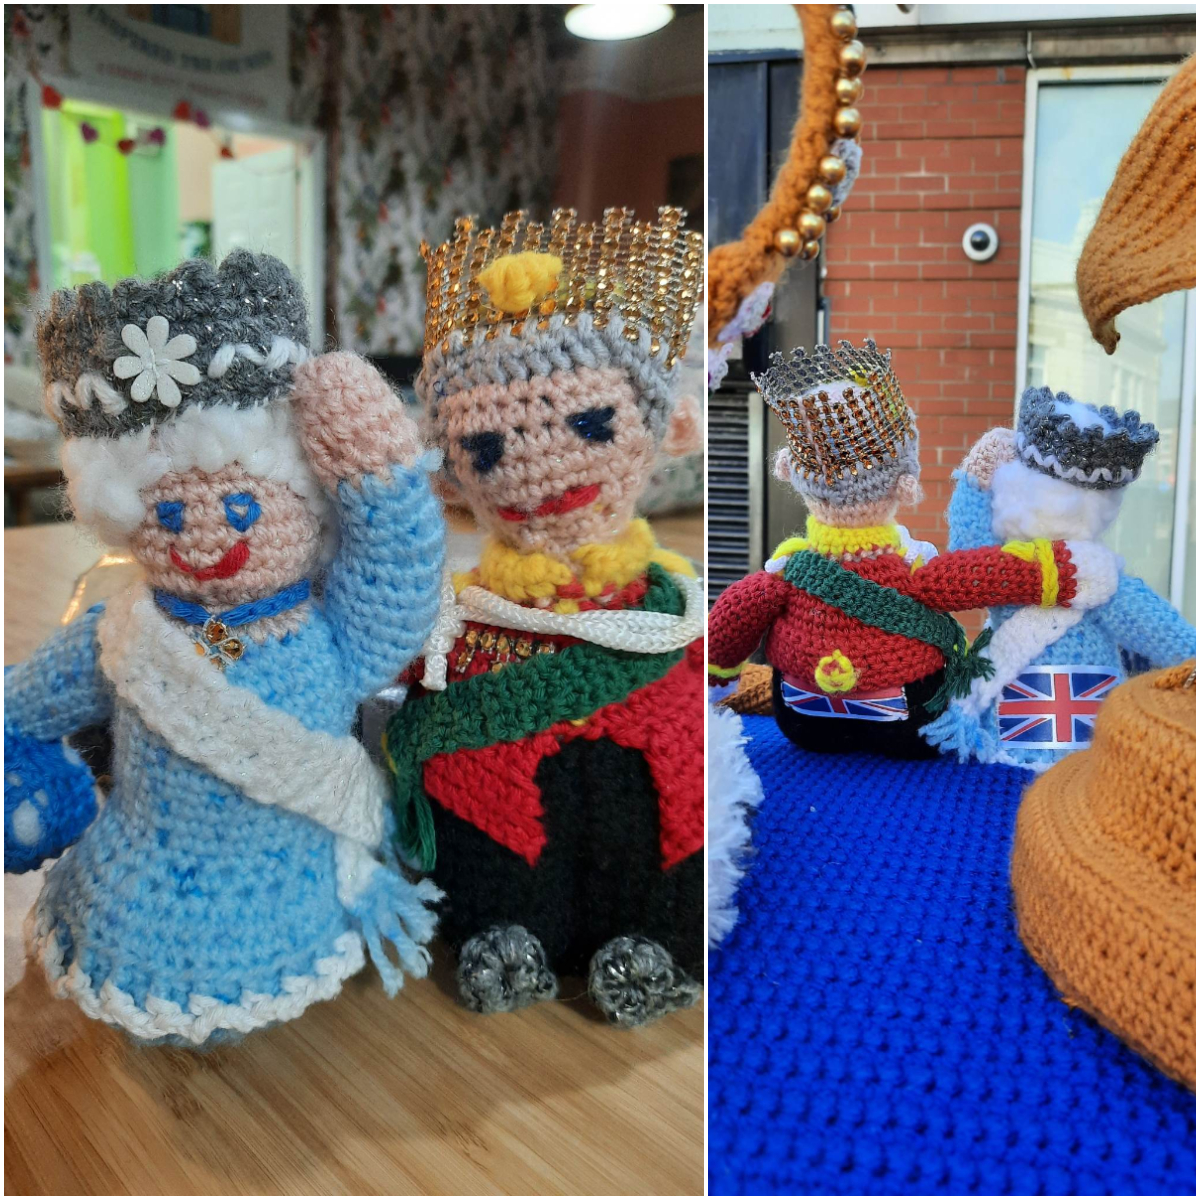 Crocheted woman waving and man with his hand on her back